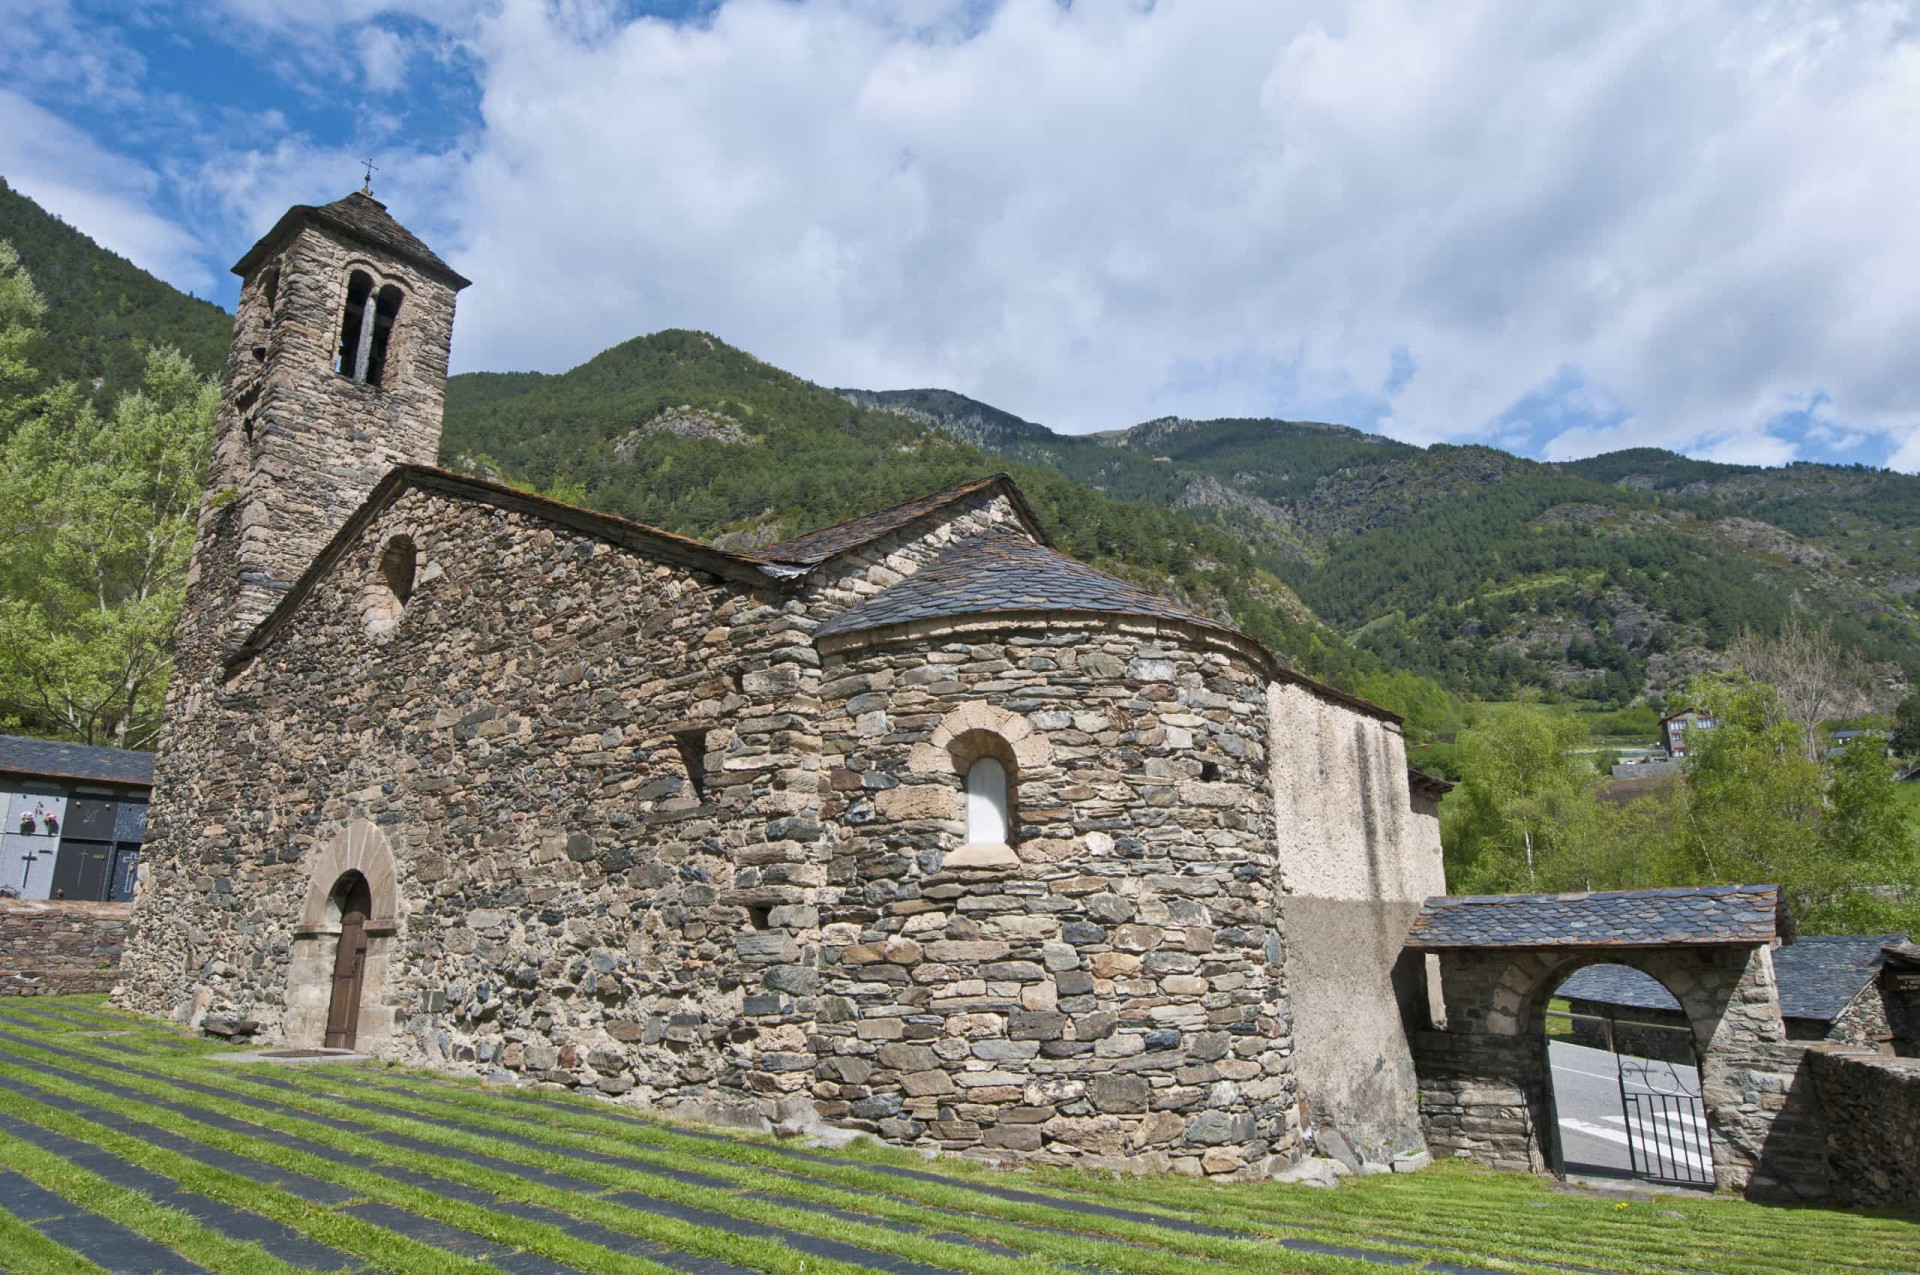 <p>Waiting amongst the fields outside the town of La Cortinada is another ancient Romanesque church, dedicated to Sant Marti de La Cortinada. Originally built around the 12th century, this marvelous work of architecture was restored during the 1600s.</p><p>You may also like:<a href="https://www.starsinsider.com/n/484349?utm_source=msn.com&utm_medium=display&utm_campaign=referral_description&utm_content=597567en-za"> Who died in Buckingham Palace?</a></p>